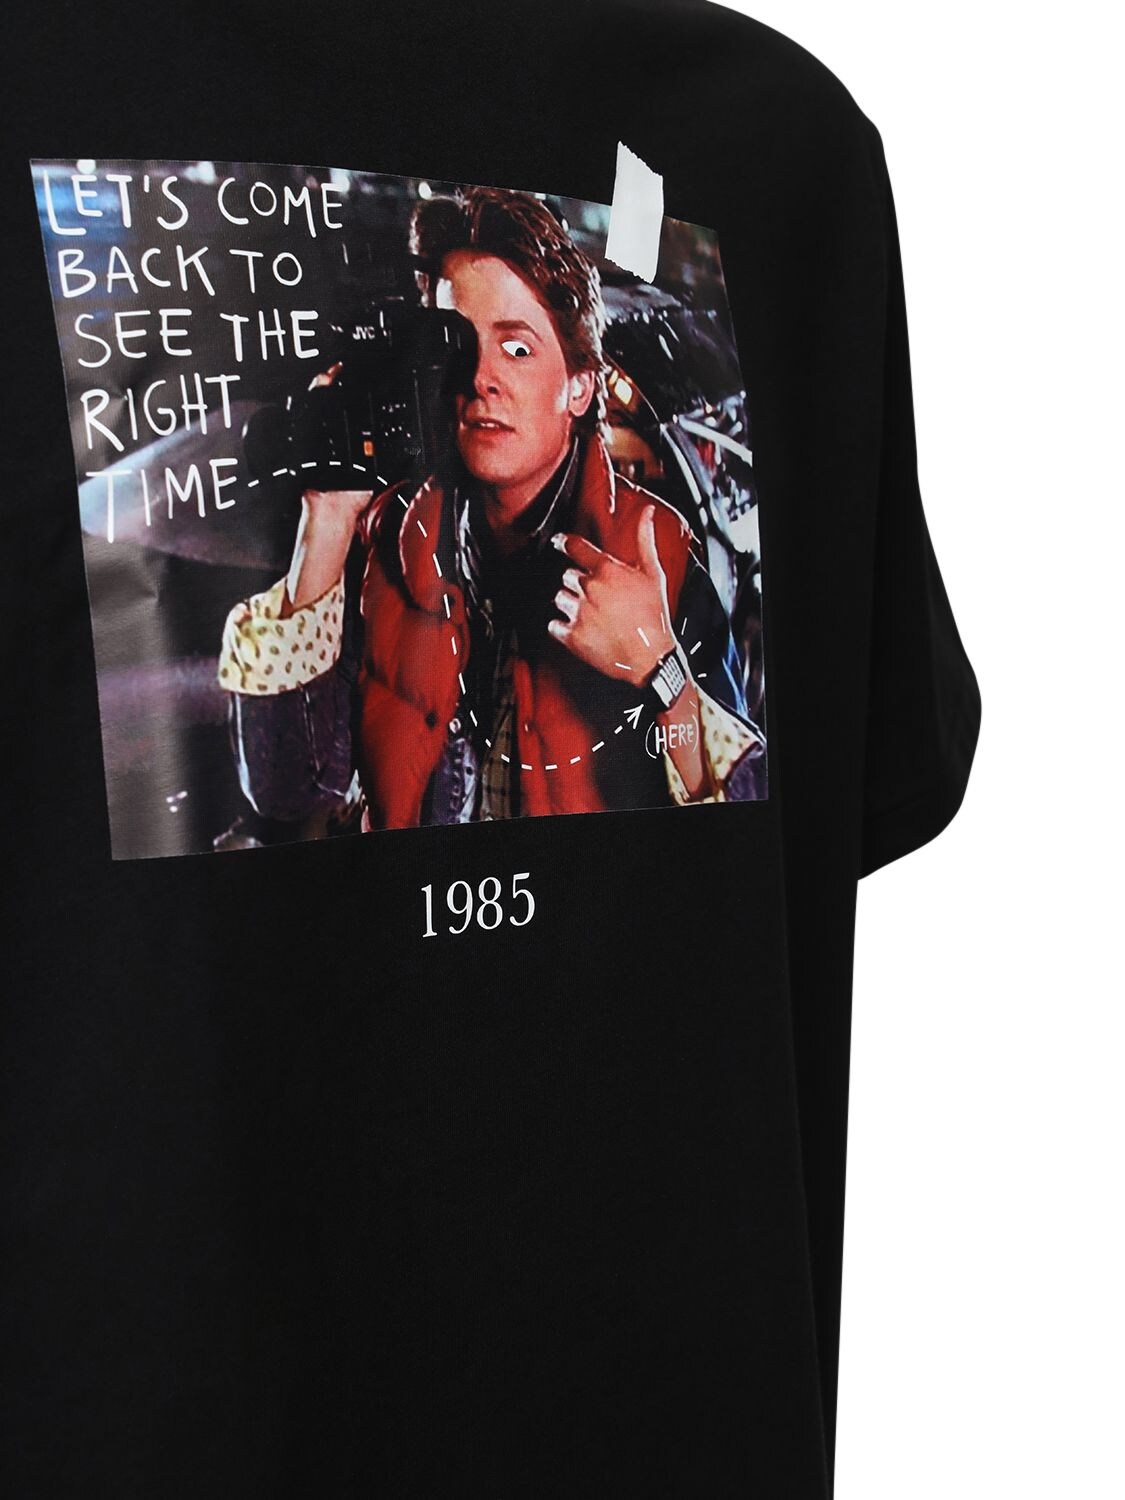 Back To The Future Tシャツ＆casio Watch